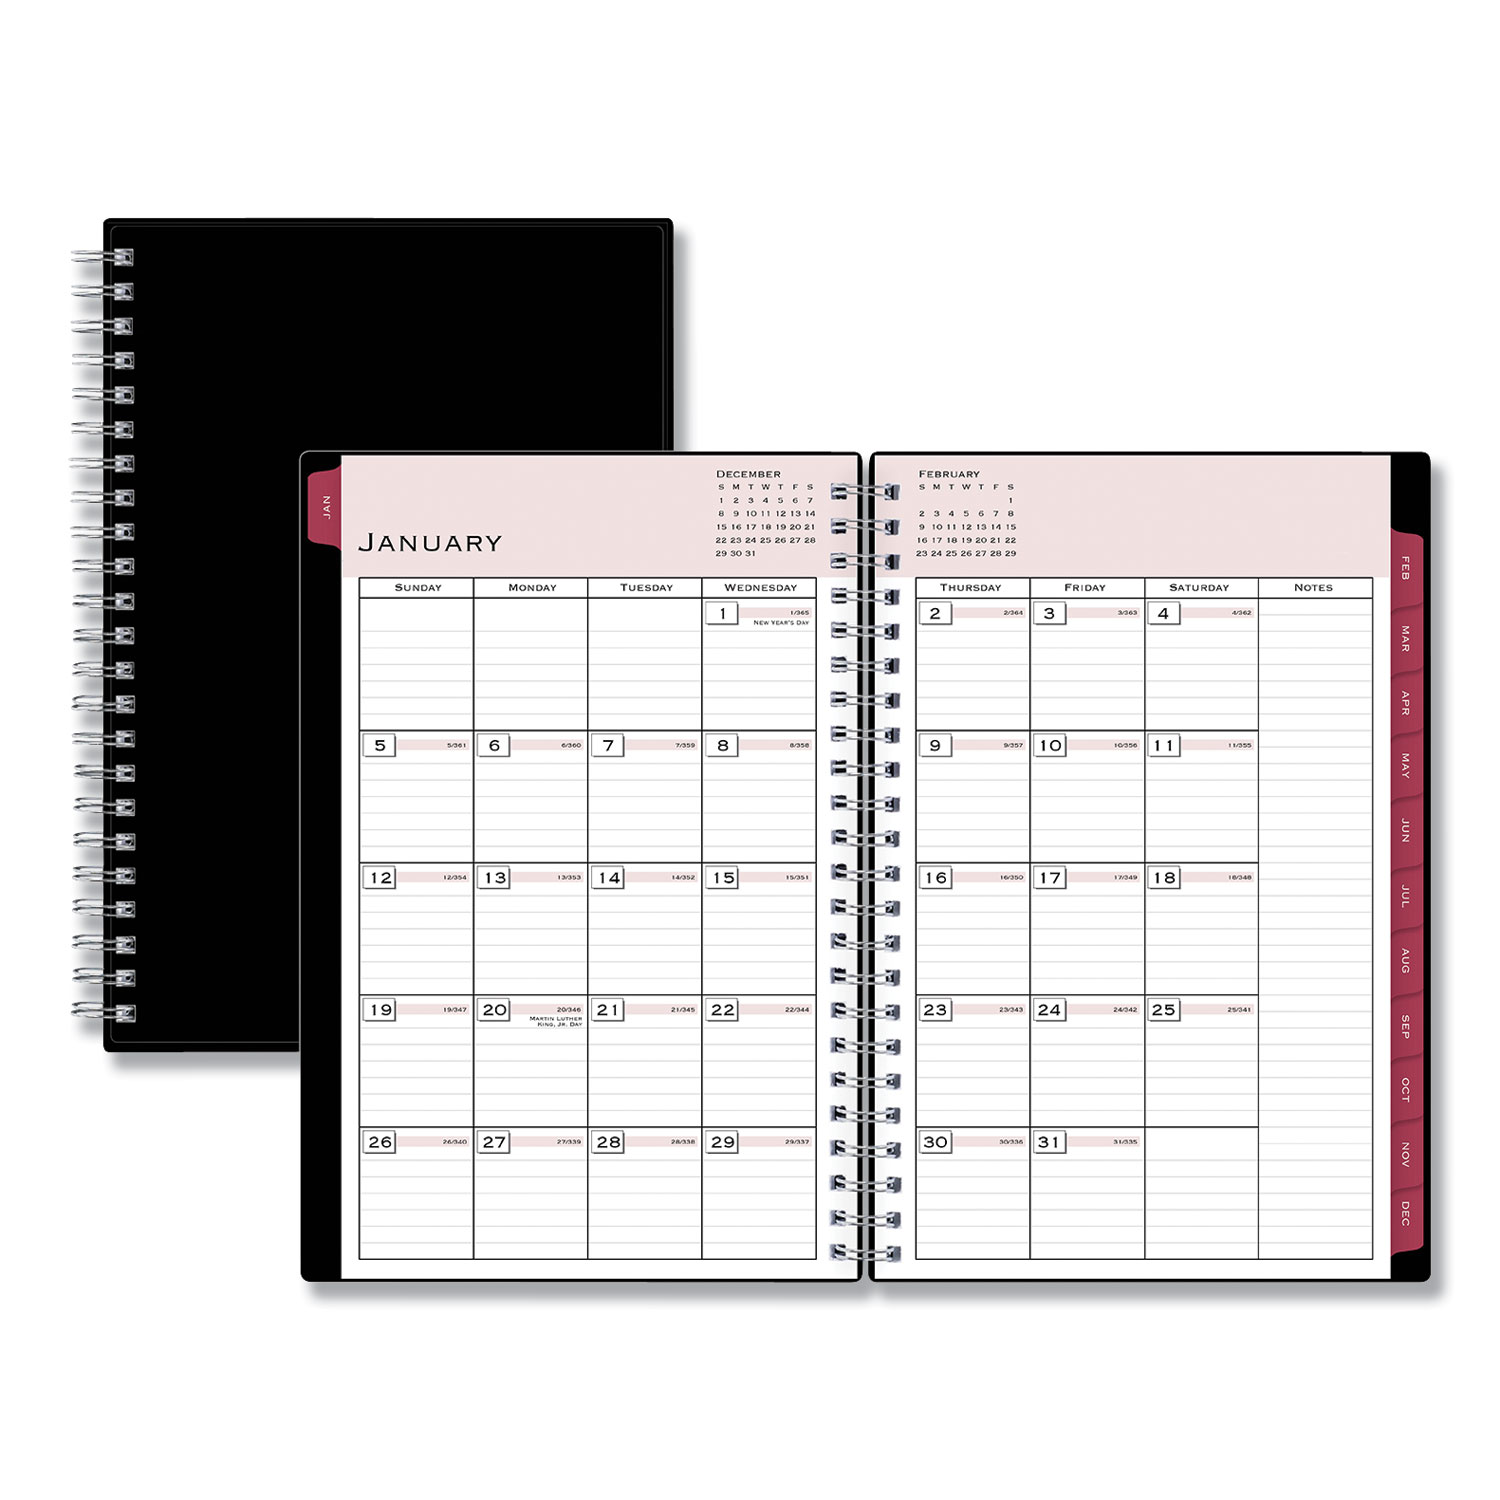  Blue Sky 111291 Classic Red Weekly/Monthly Planner, Open Scheduling, 8 x 5, Black Cover, 2020 (BLS111291) 